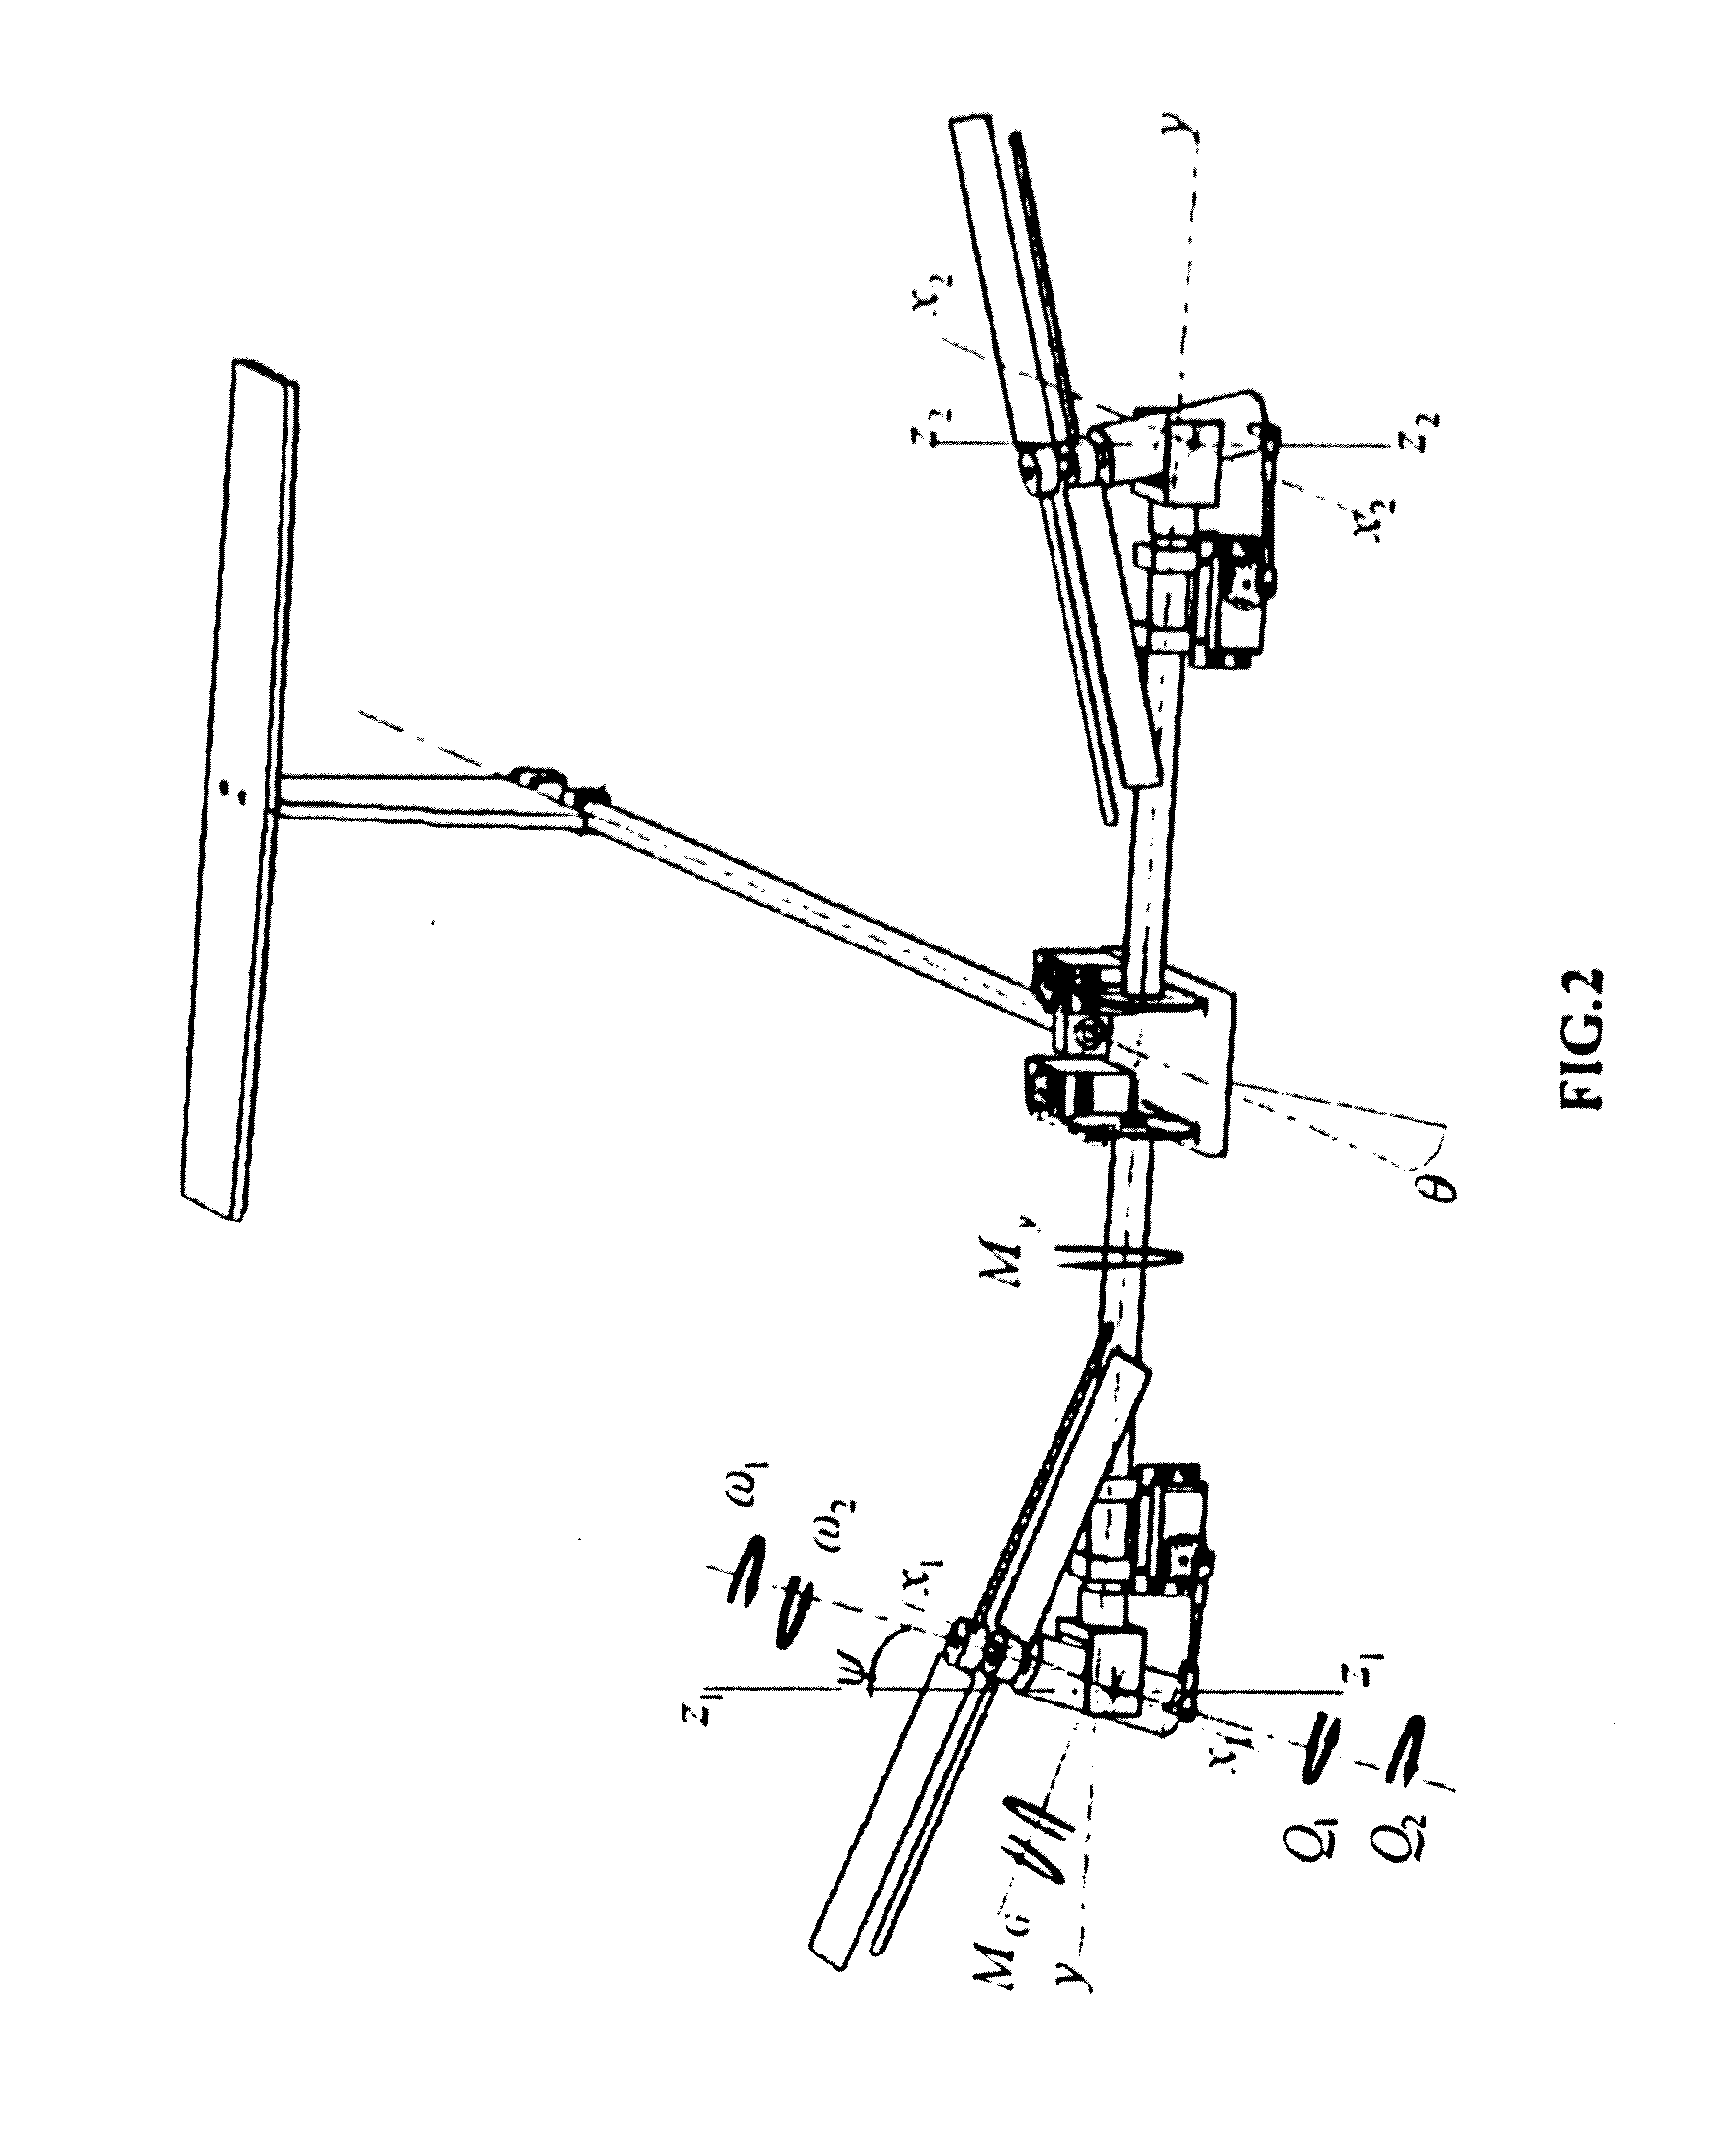 Sided performance coaxial vertical takeoff and landing (VTOL) UAV and pitch stability technique using oblique active tilting (OAT)